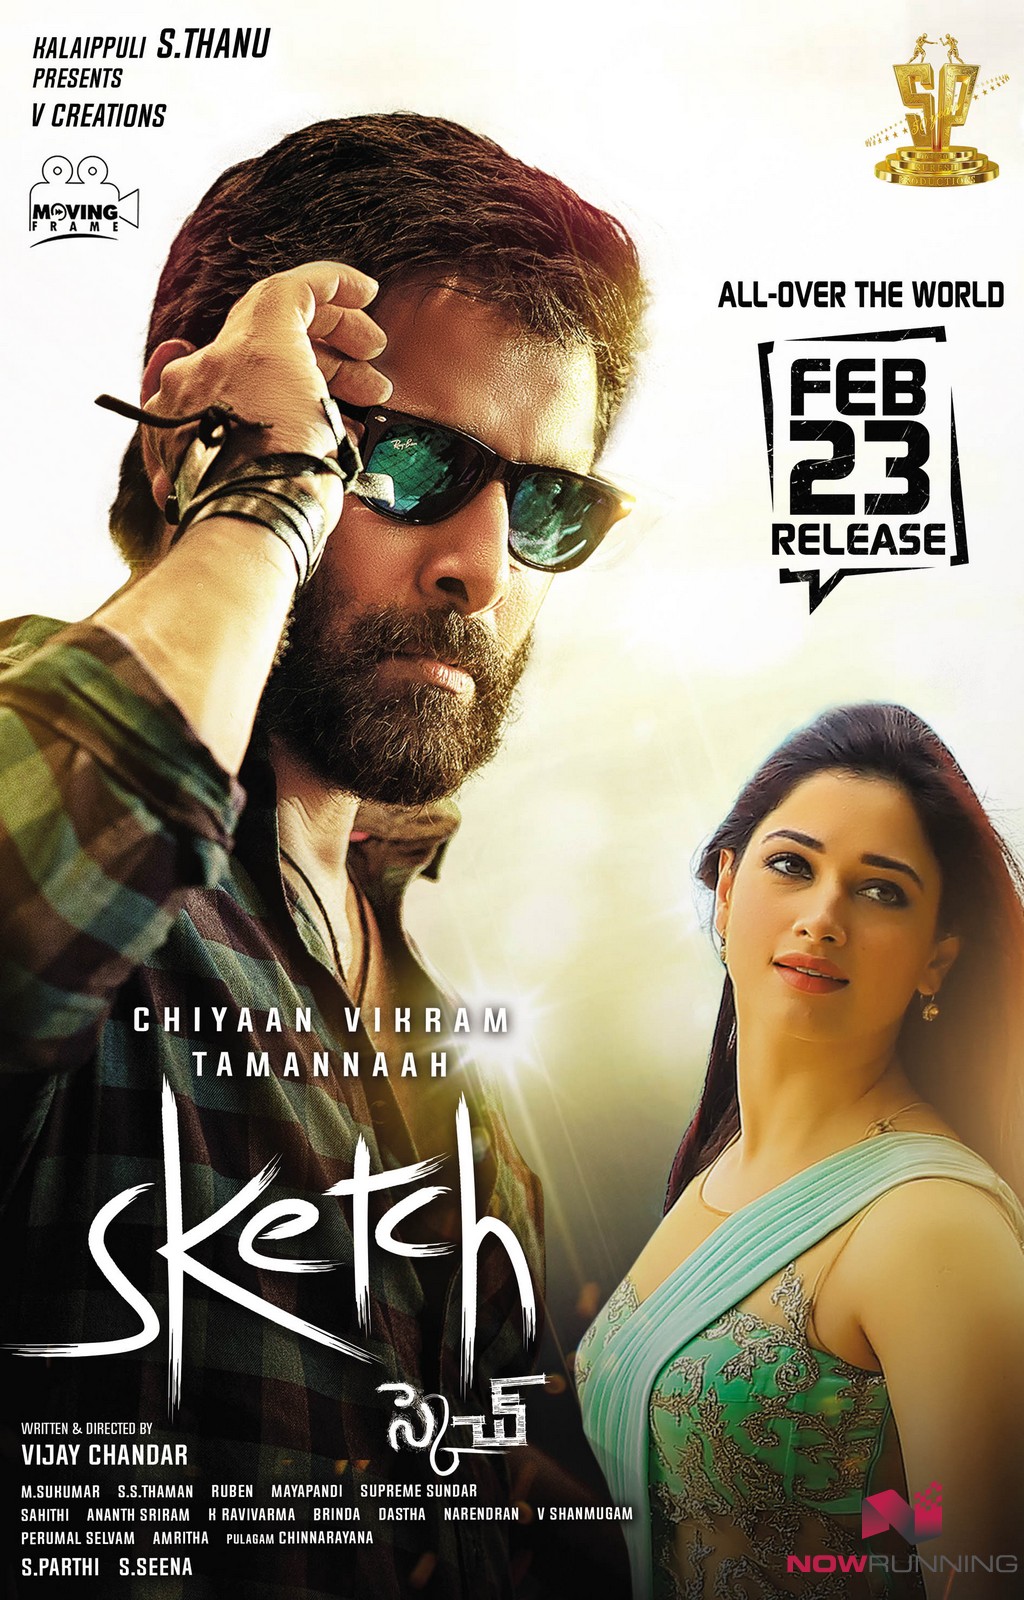 Vikram's 'Sketch' now has official release date - Hollywood News -  IndiaGlitz.com